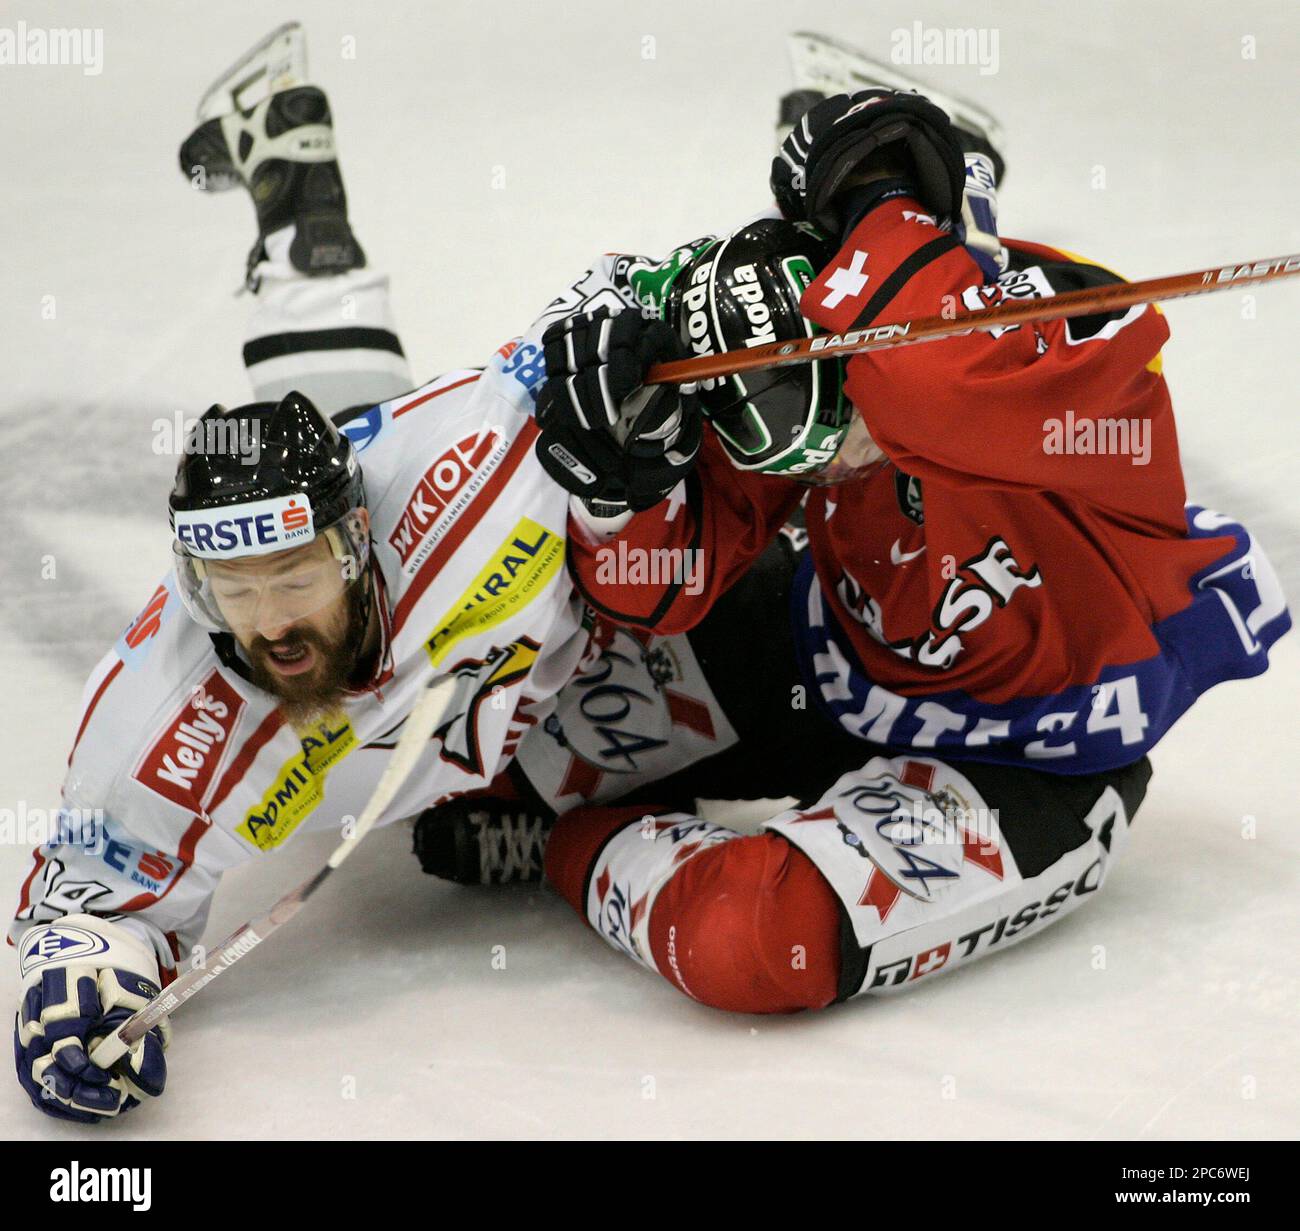 Markus Peintner, left, from Austria collides with Beat Forster, right, of Switzerland during their Loto Cup Ice Hockey match played in Bratislava, Slovakia, Saturday Dec. 16, 2006. Switzerland defeated Austria 3-1and gained itself the Loto Cup 2006 title. (AP Photo/Petr David Josek) Stock Photo